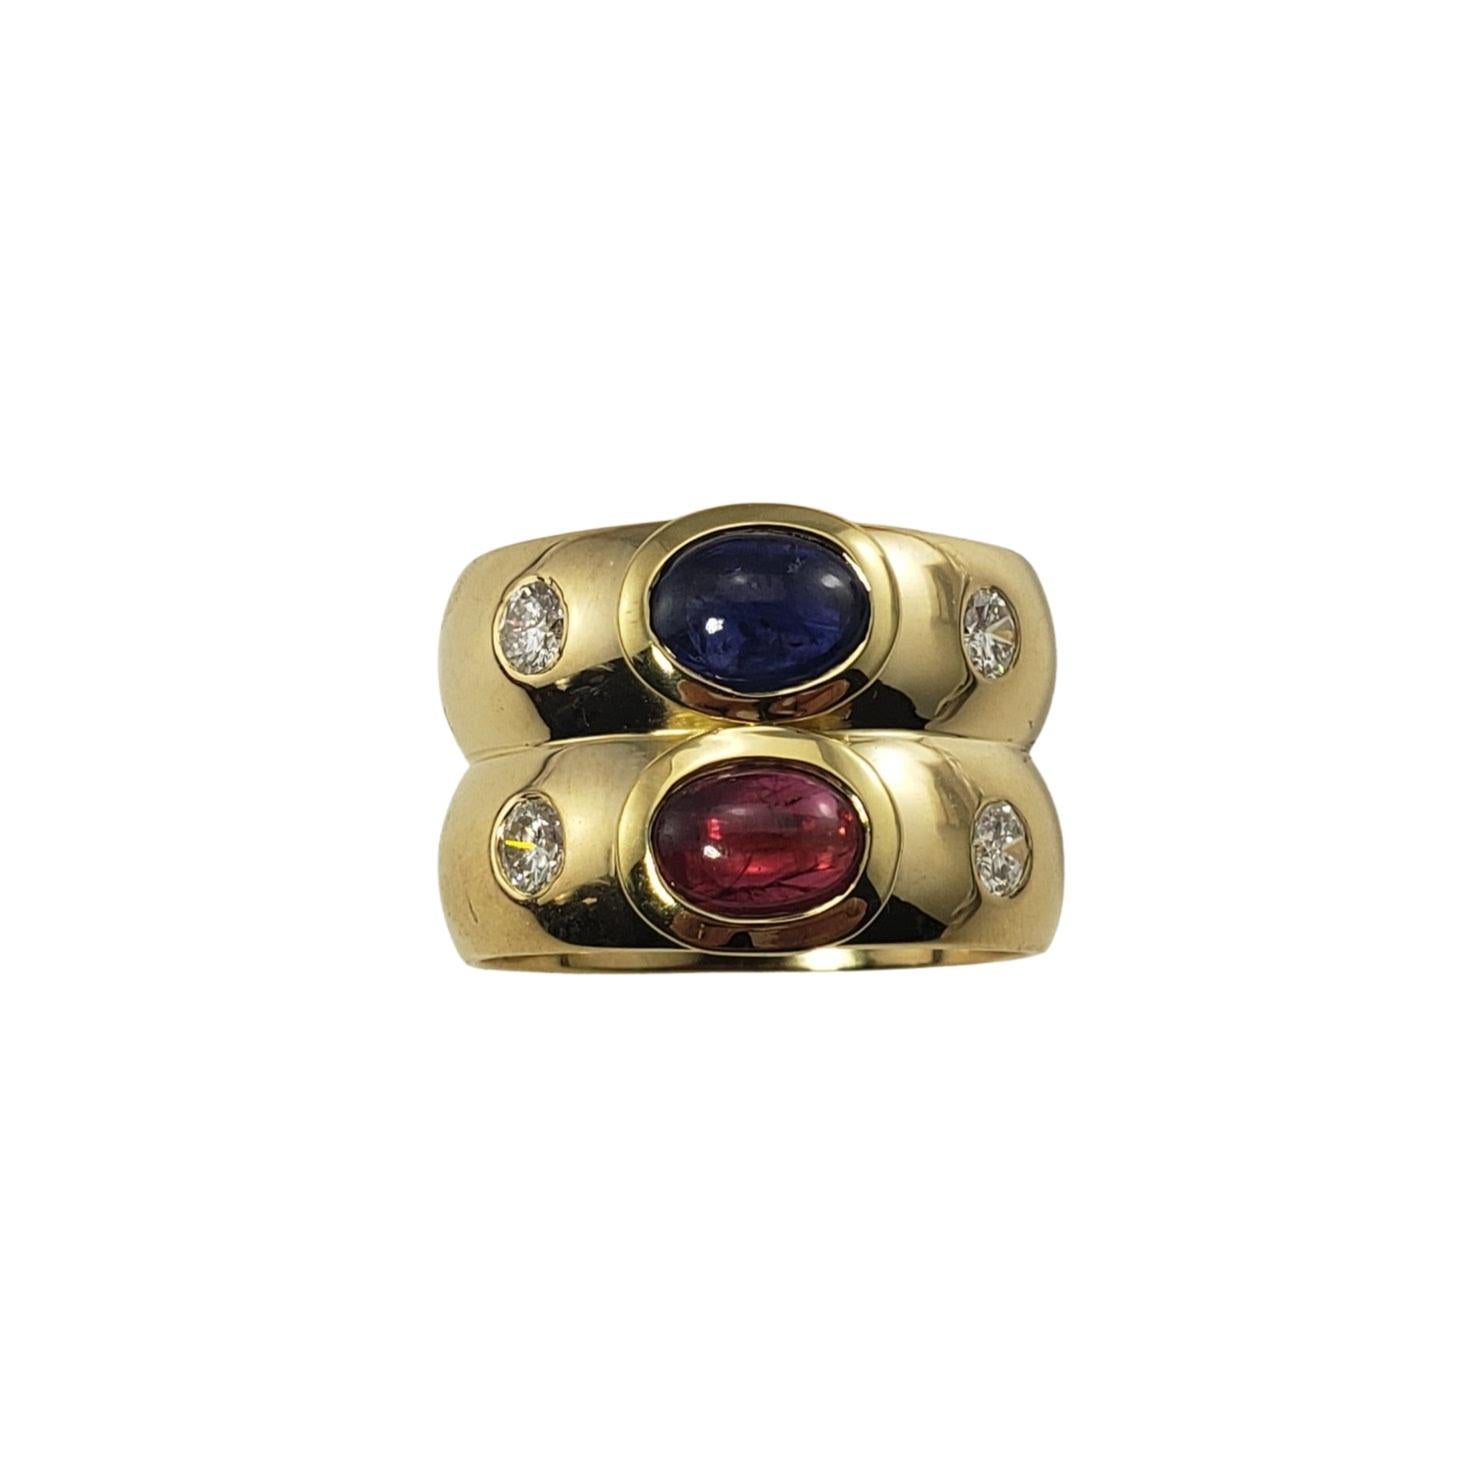 Vintage 18 Karat Yellow Gold Natural Ruby, Sapphire and Diamond Ring Size 8-

This stunning ring features one oval cabochon ruby, one oval cabochon sapphire ( 7 mm x 5 mm each) and four round brilliant cut diamonds set in classic 18K yellow gold. 